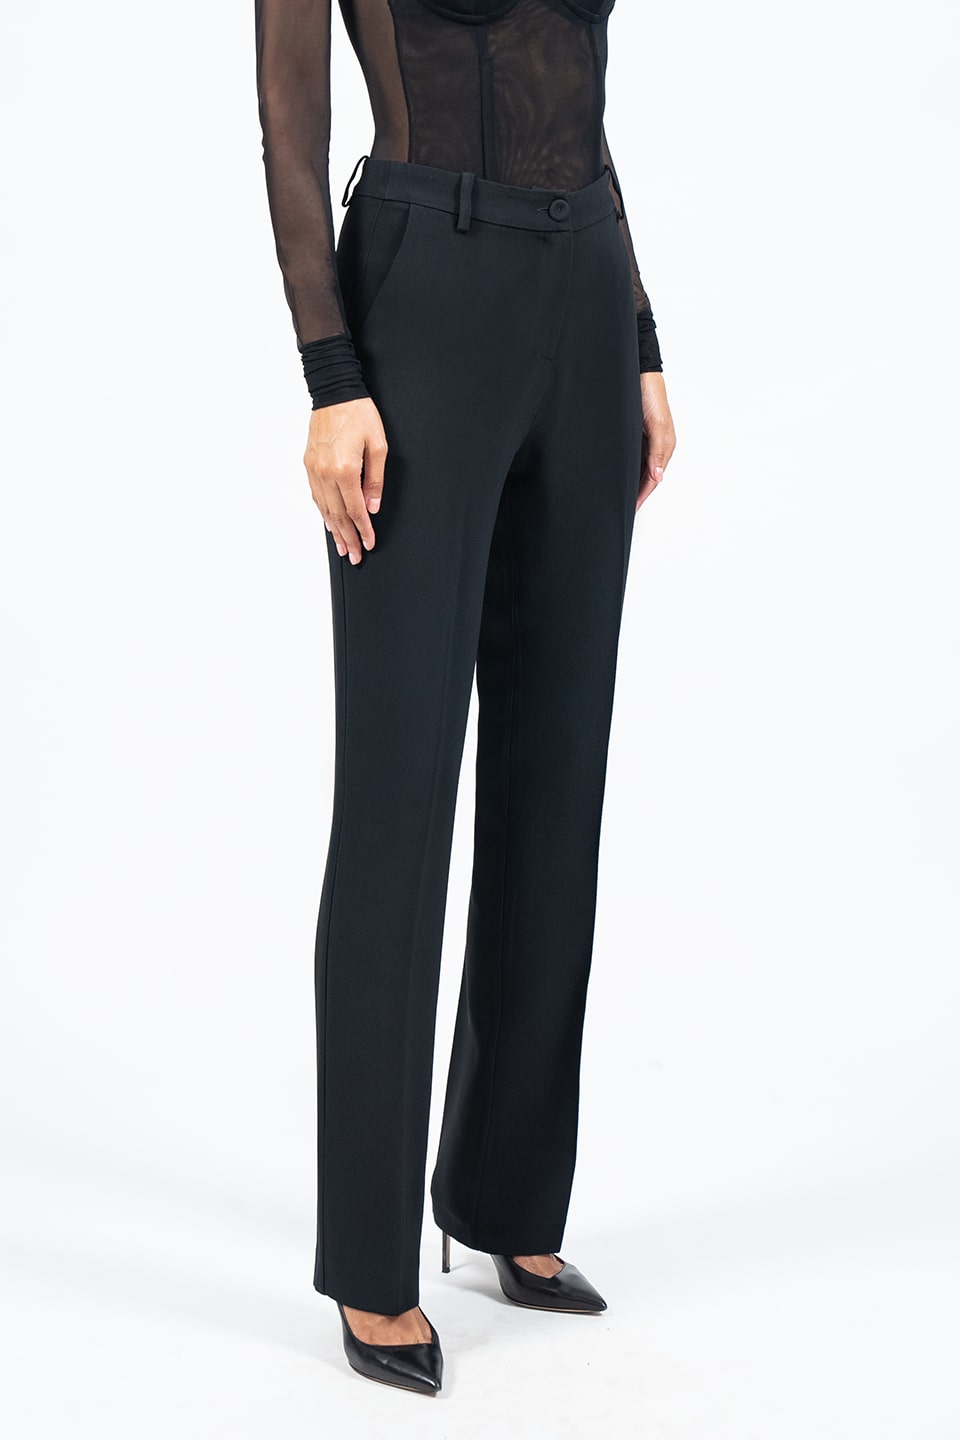 Designer Black Women pants, shop online with free delivery in UAE. Product gallery 3